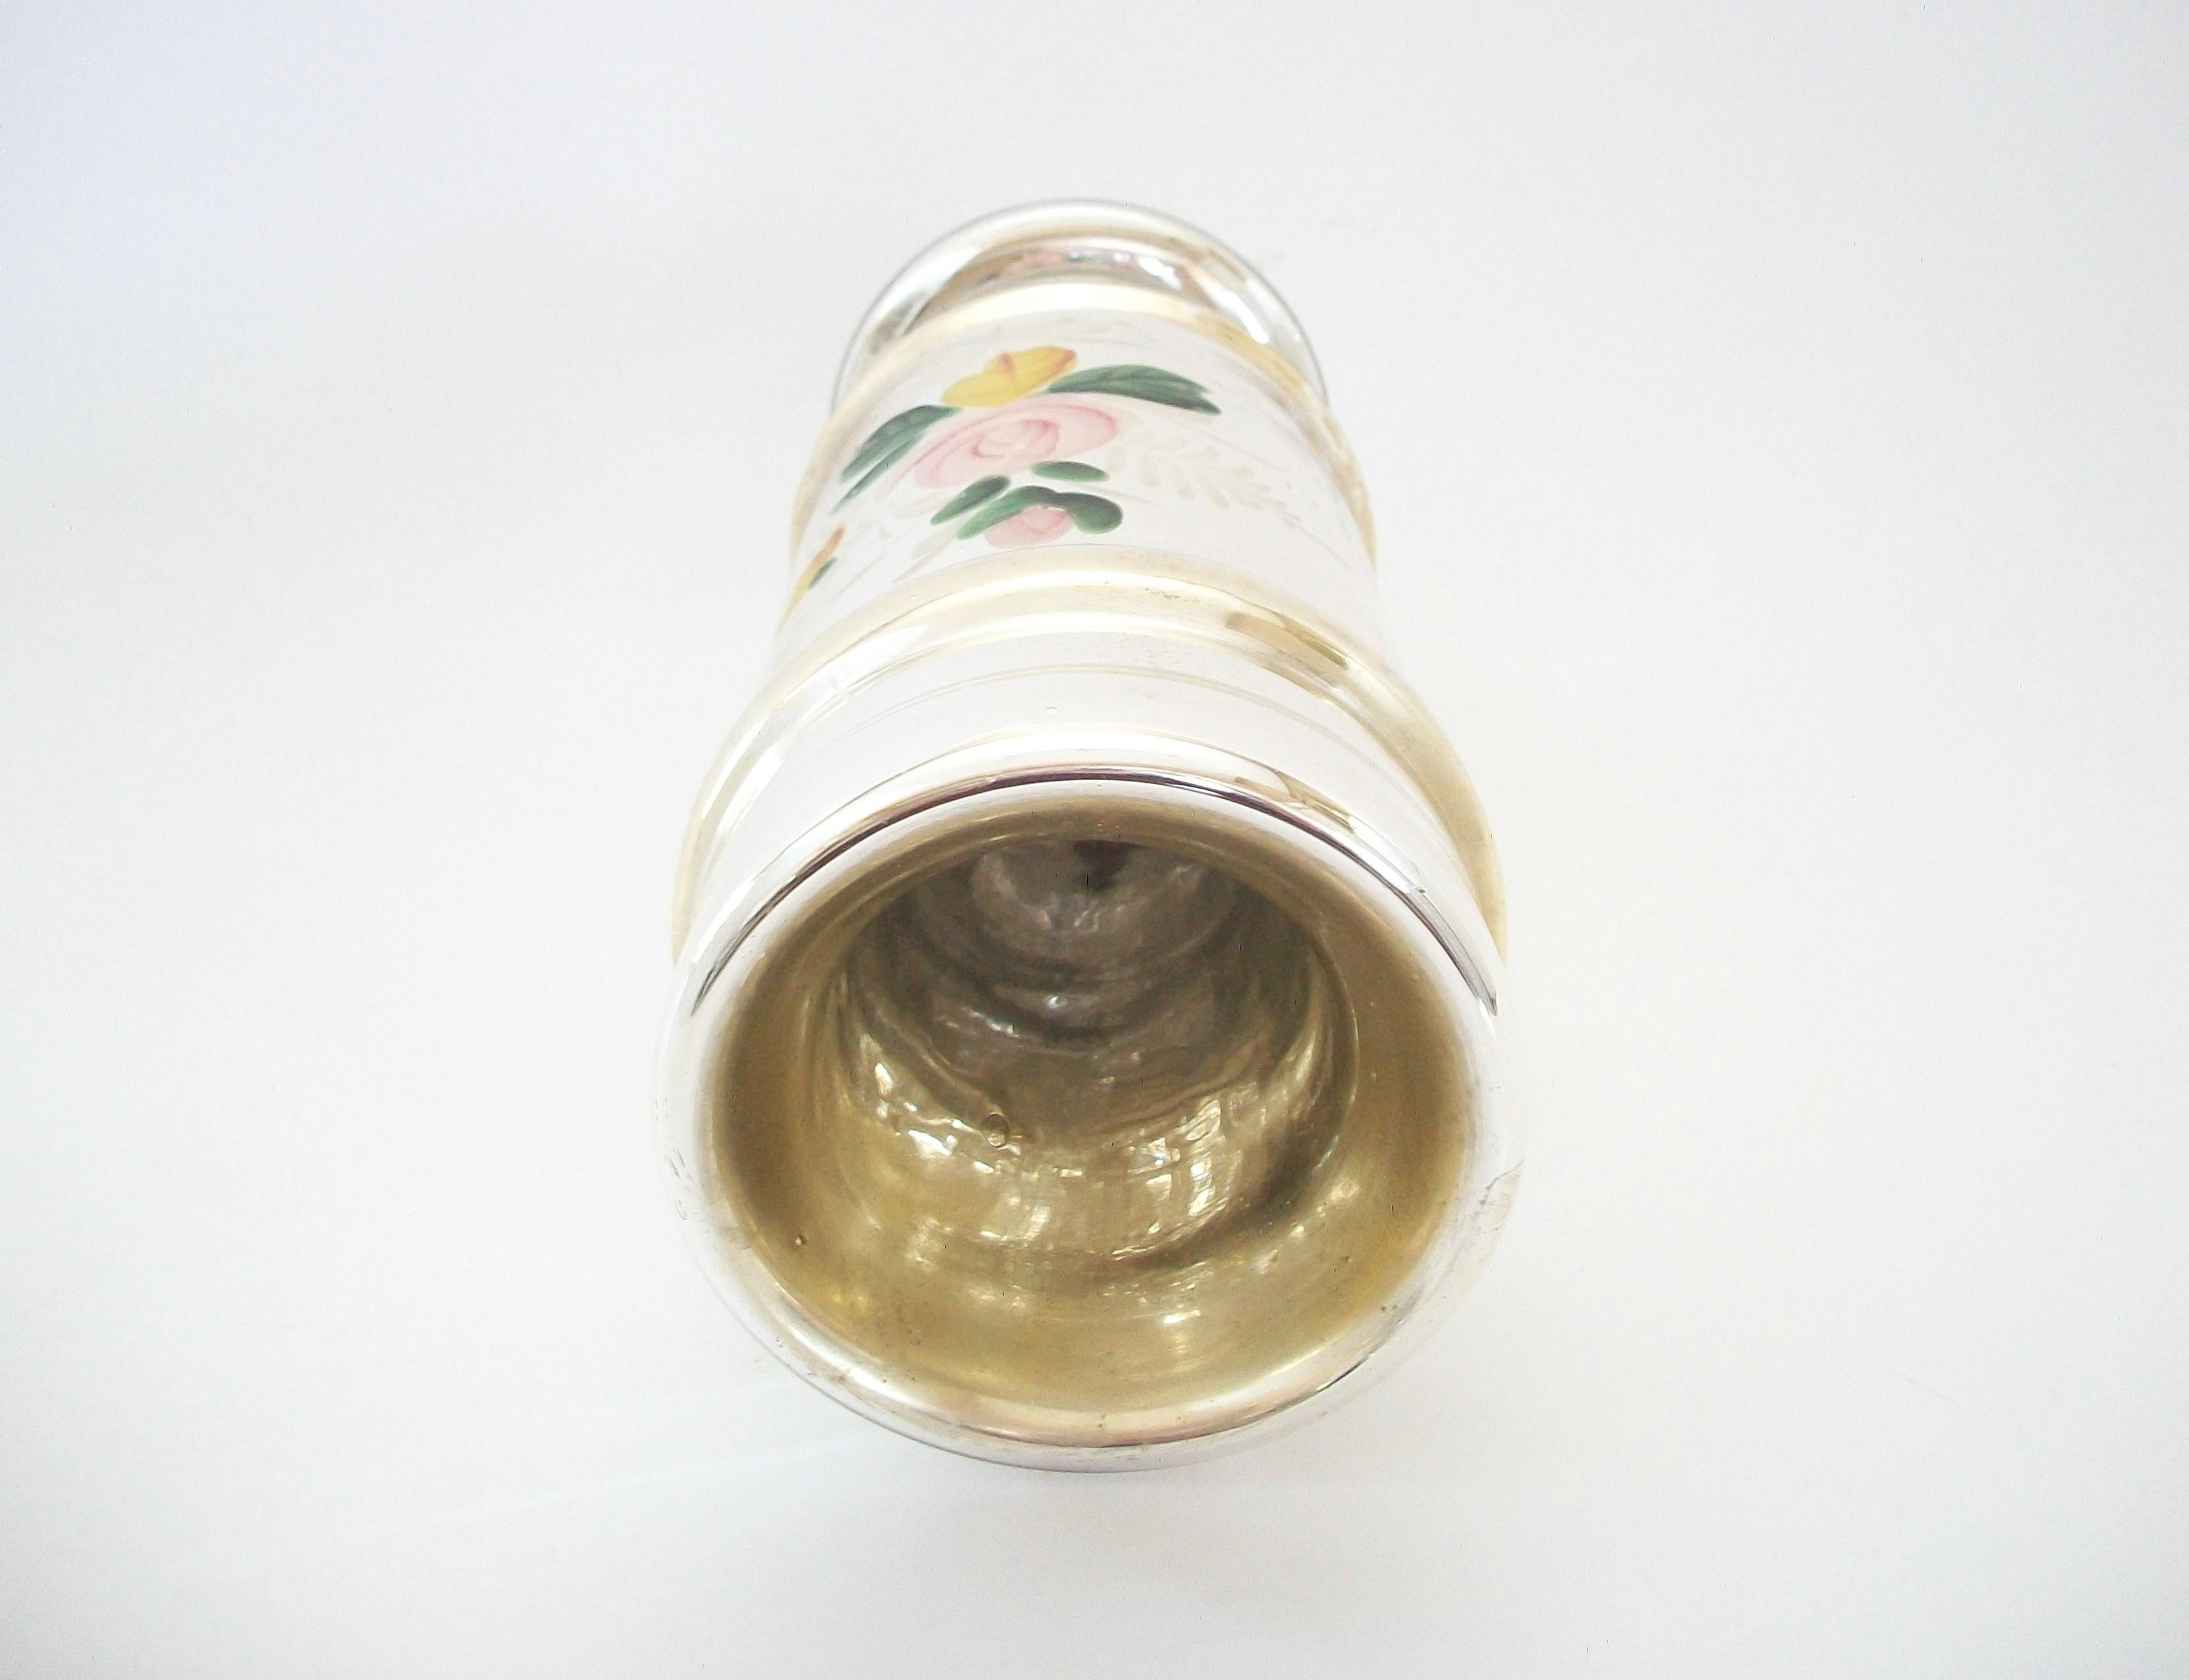 Antique Floral Painted Gold & Silver Mercury Glass Vase - France - 19th Century For Sale 1